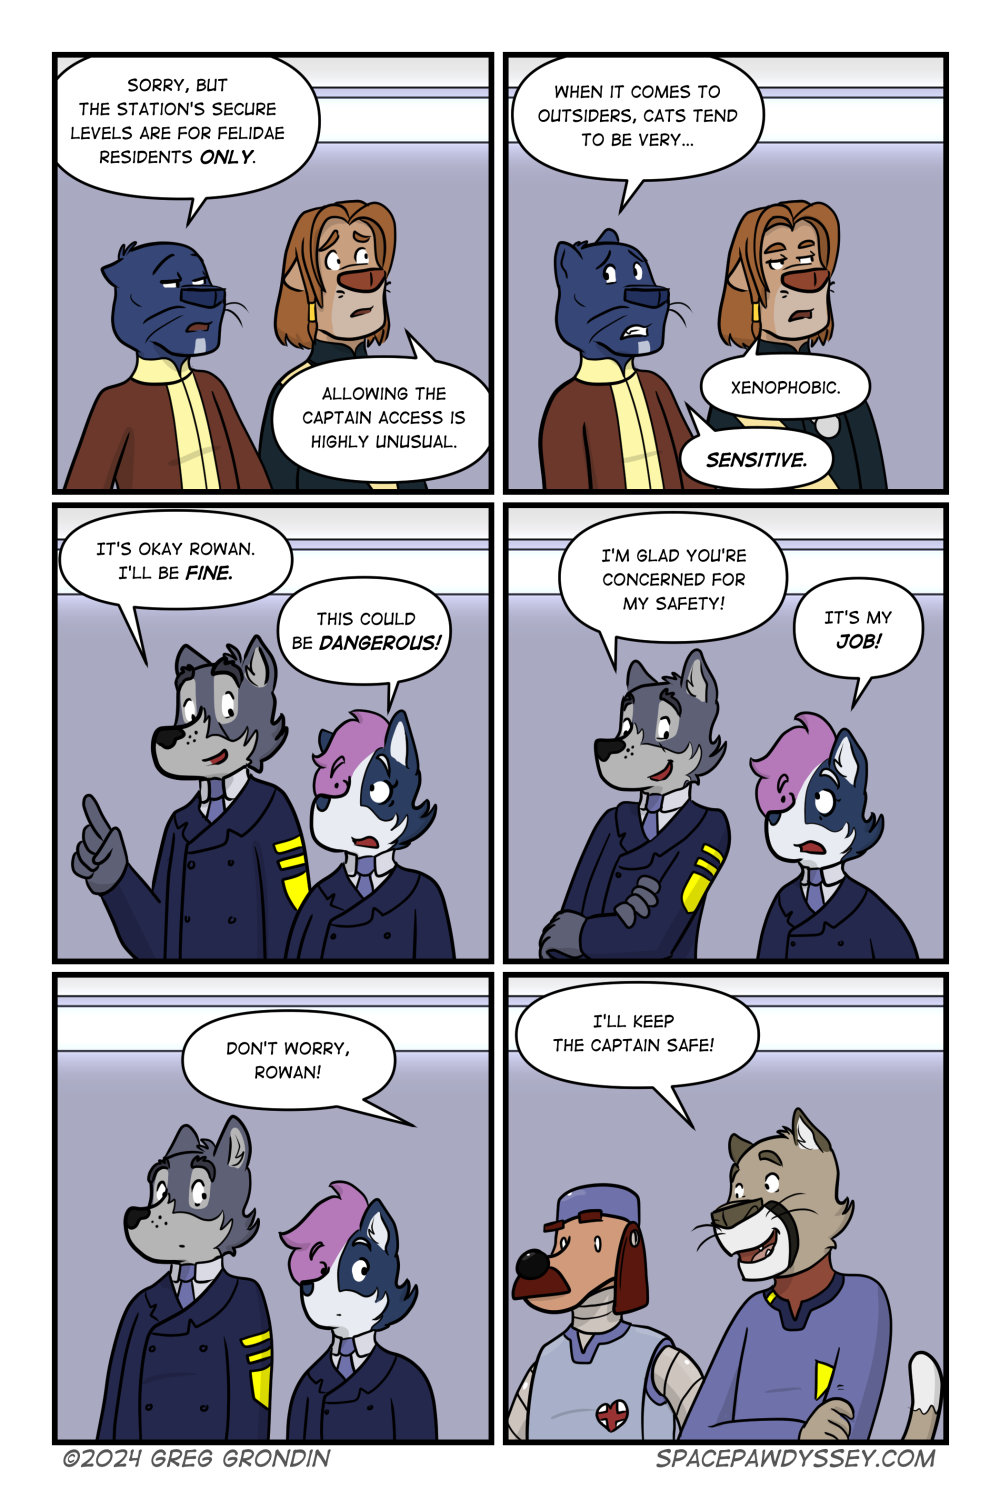 Space Pawdyssey #674